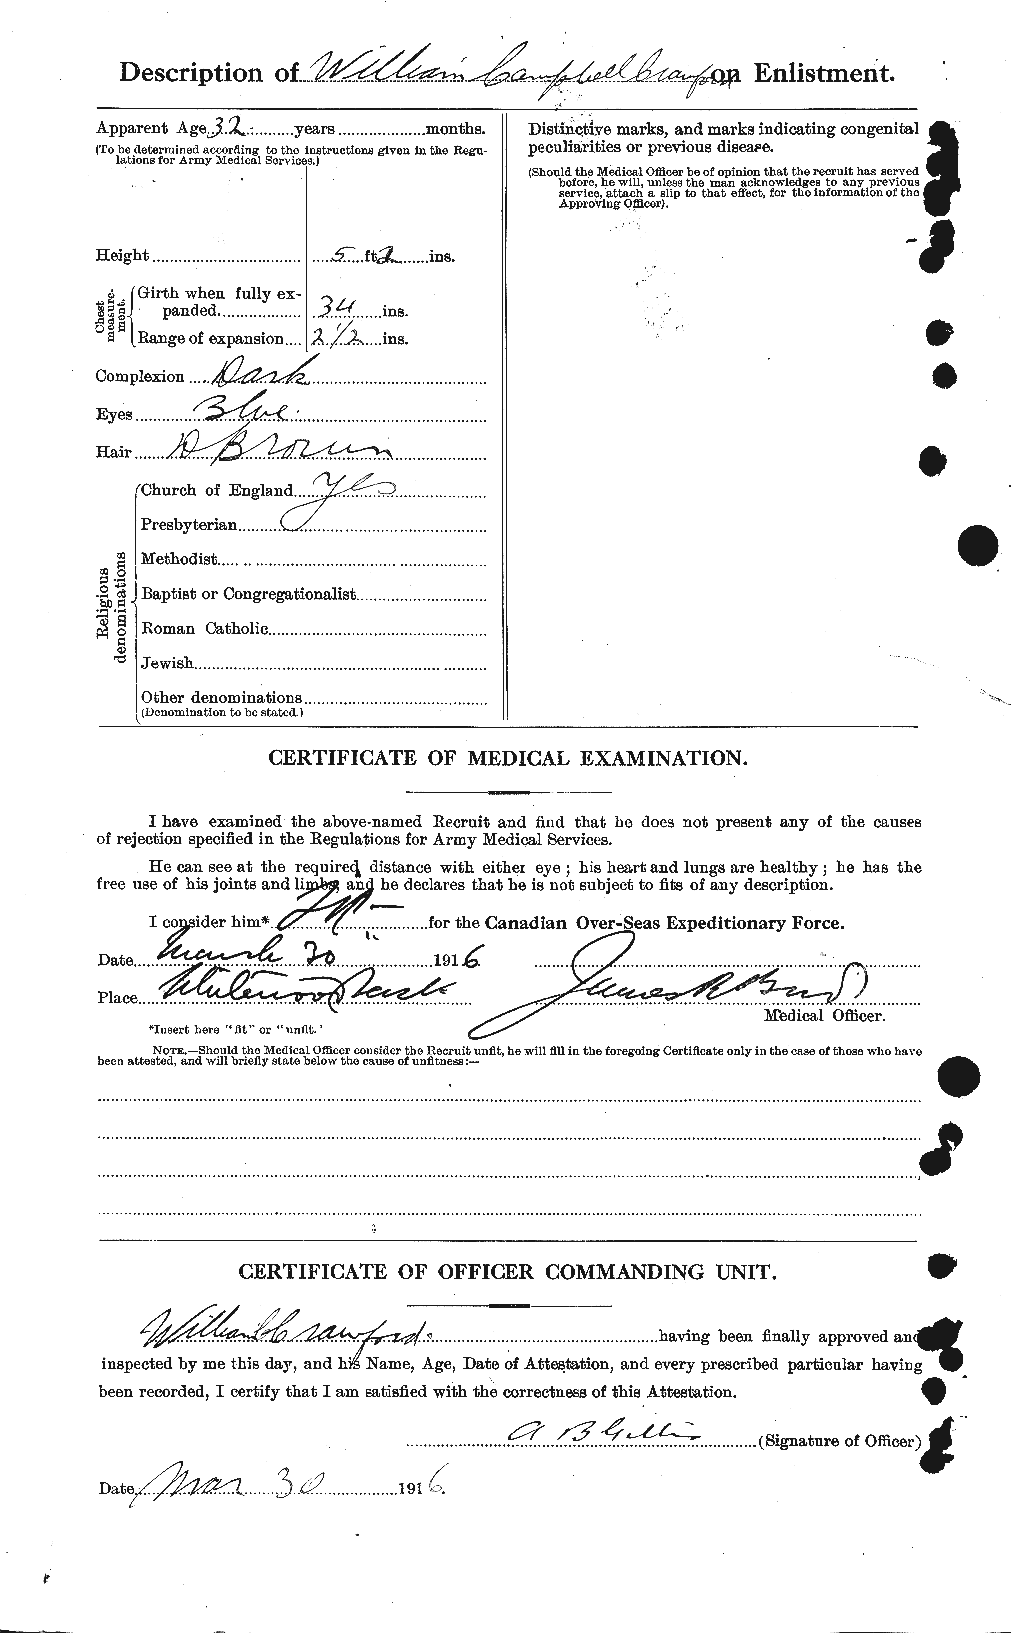 Personnel Records of the First World War - CEF 061149b